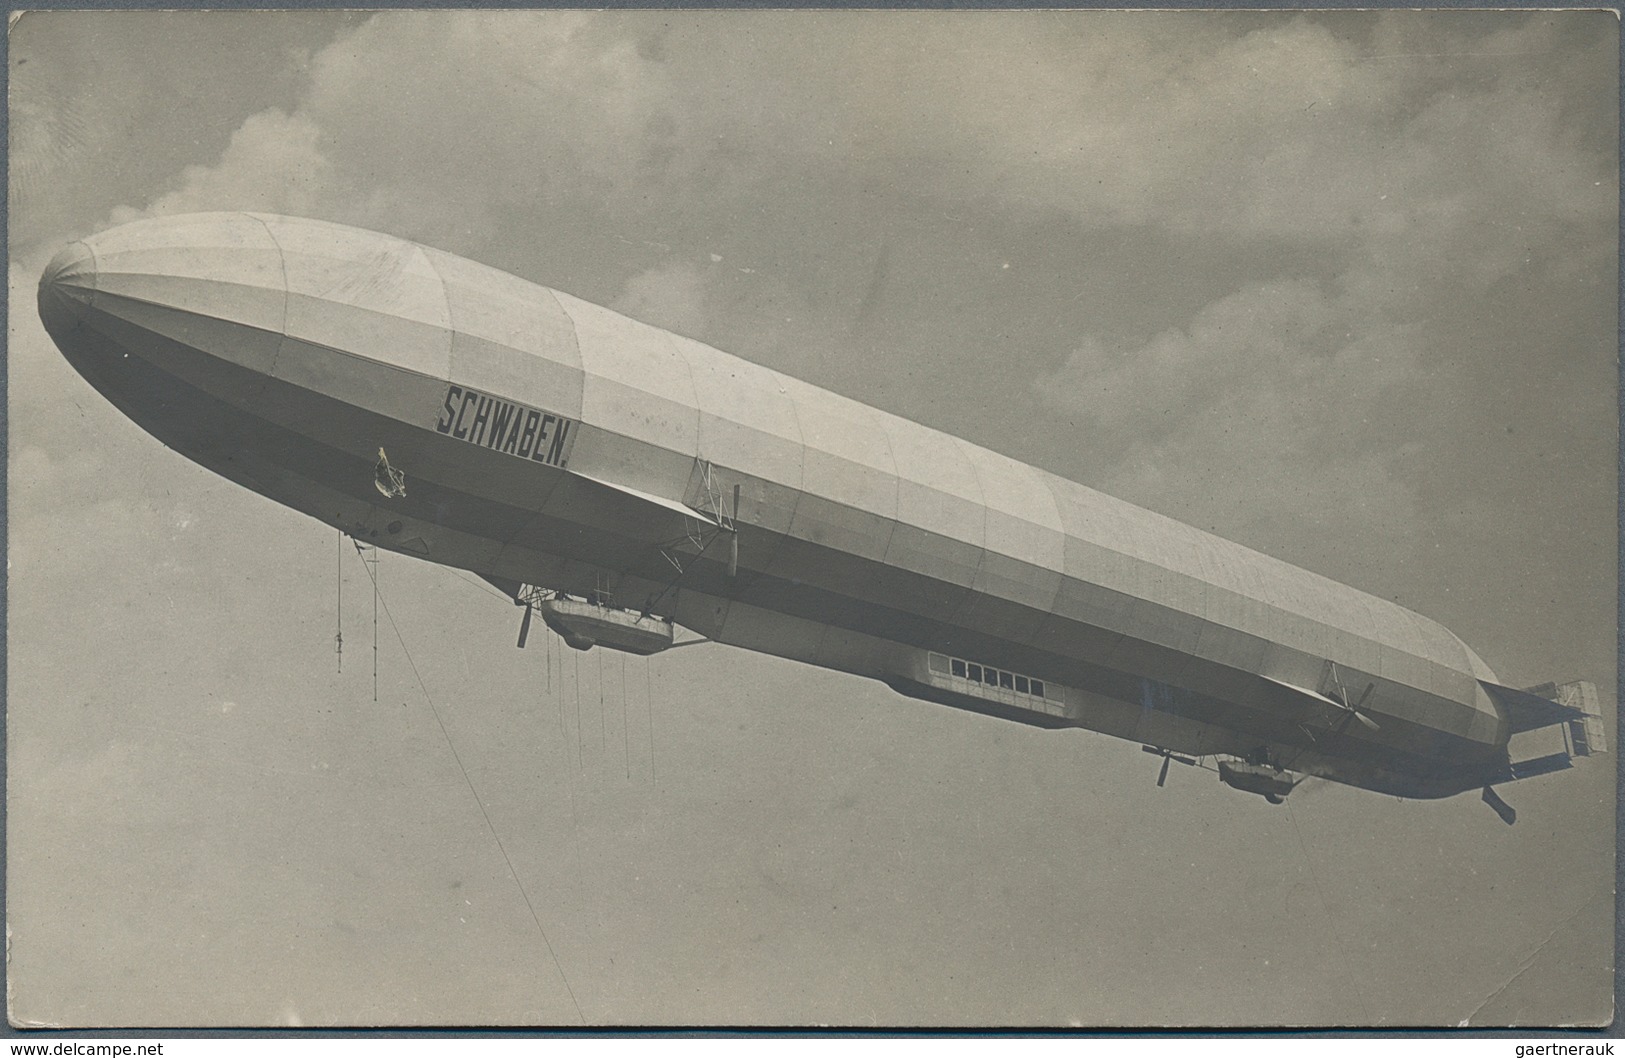 Zeppelinpost Deutschland: Over 140 Zeppelin postcards, mostly Real Photos with the largest part pion